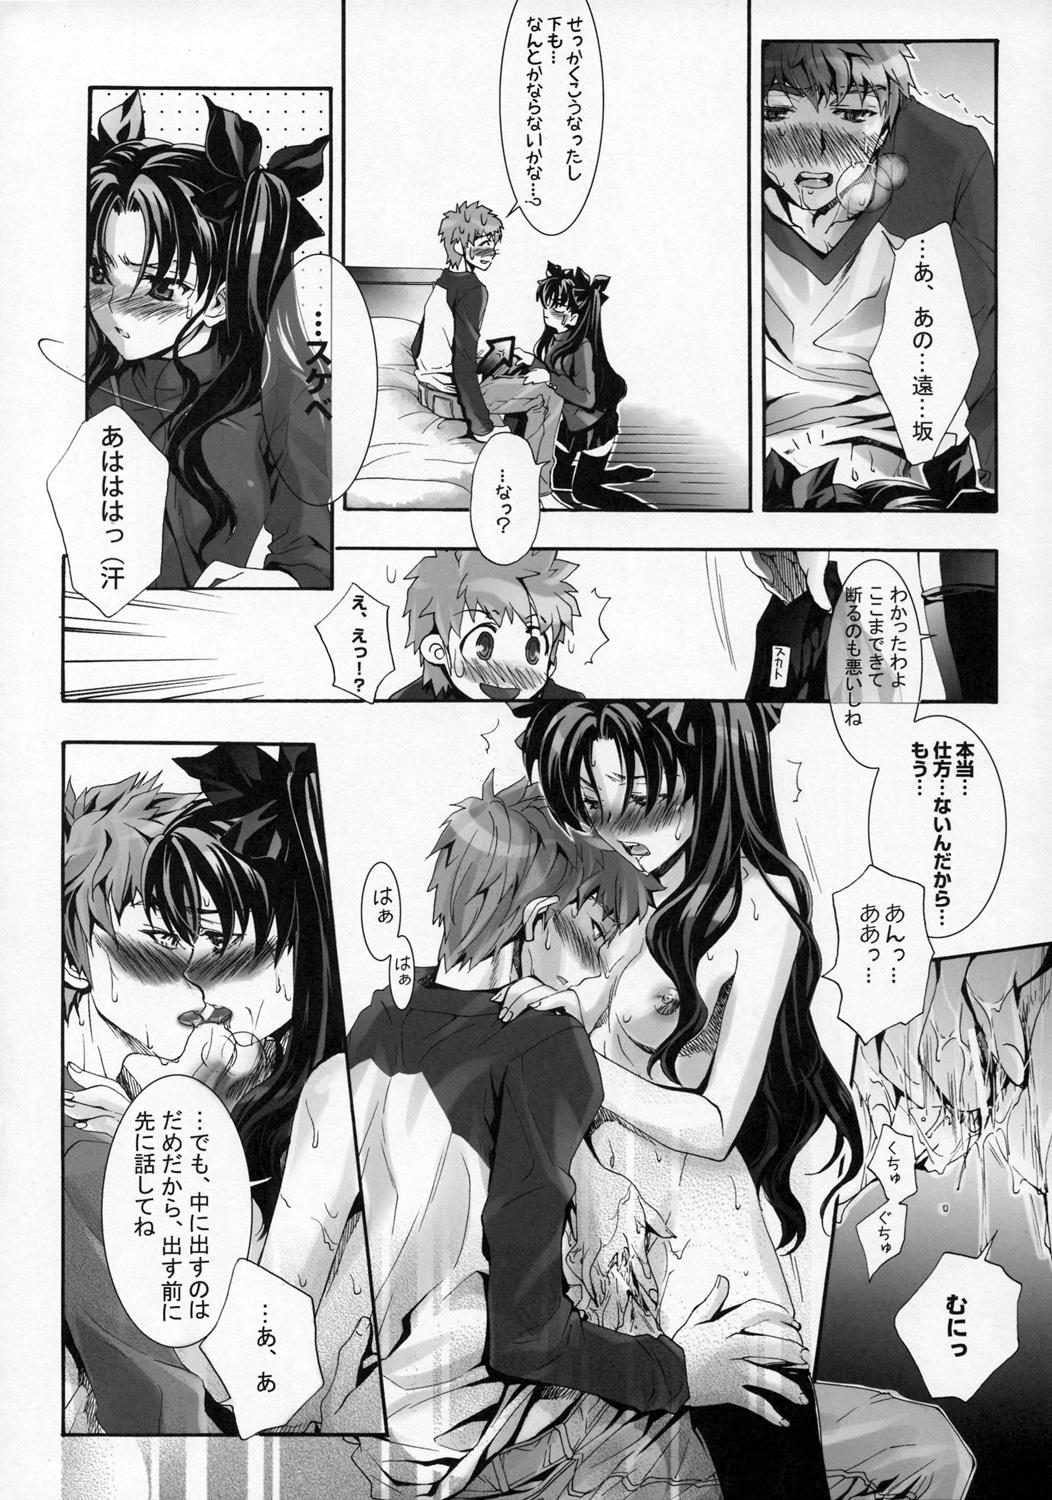 Young Tits Mittsubotan de kyun! - Fate stay night Toheart2 Public Sex - Page 10